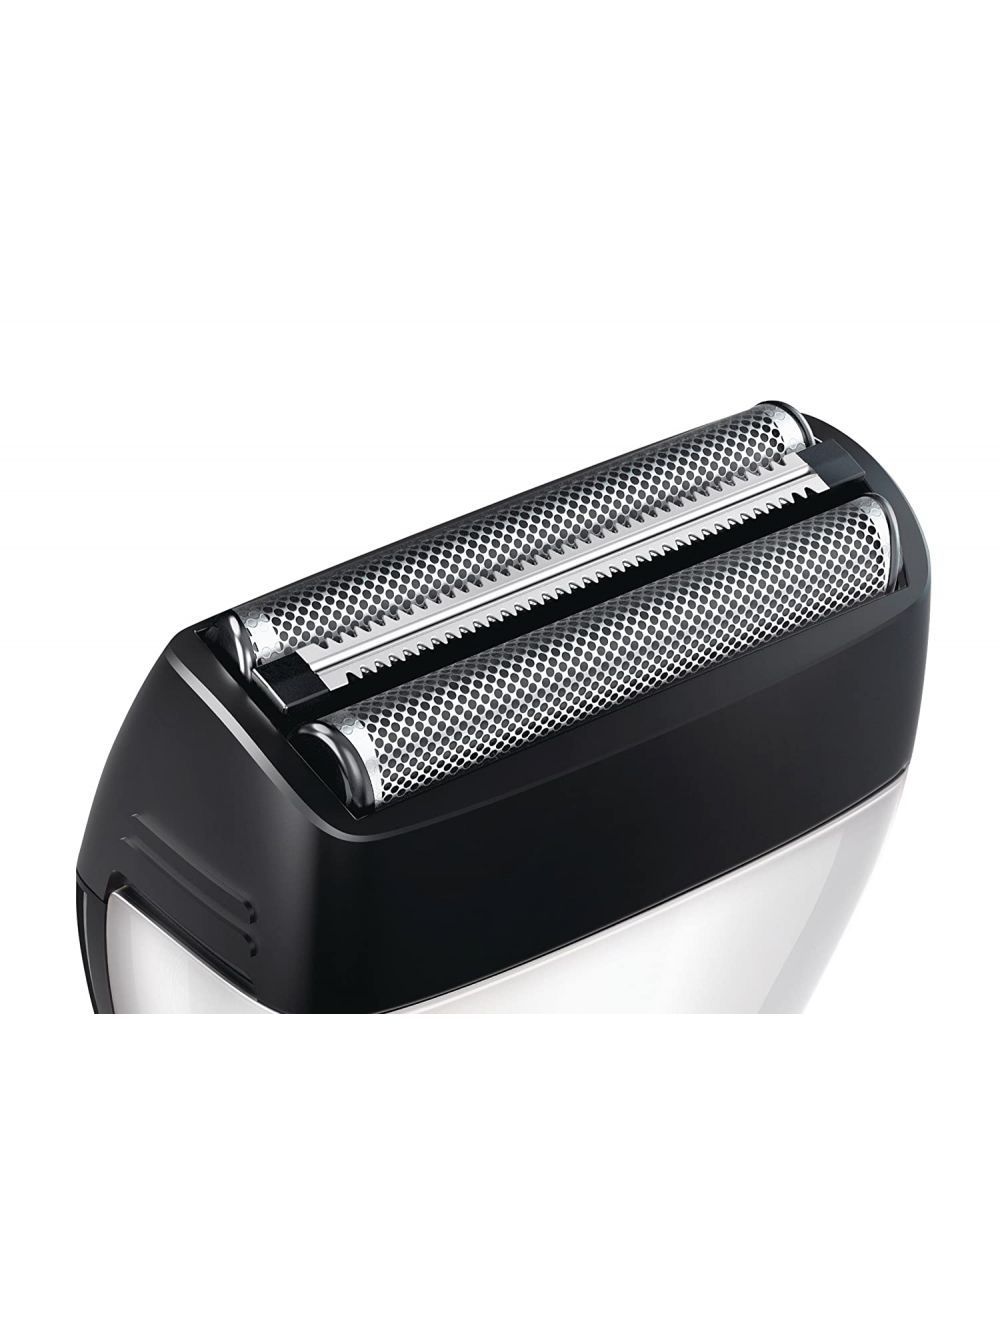 Philips Beard Styler and Shaver (QS6140/15)